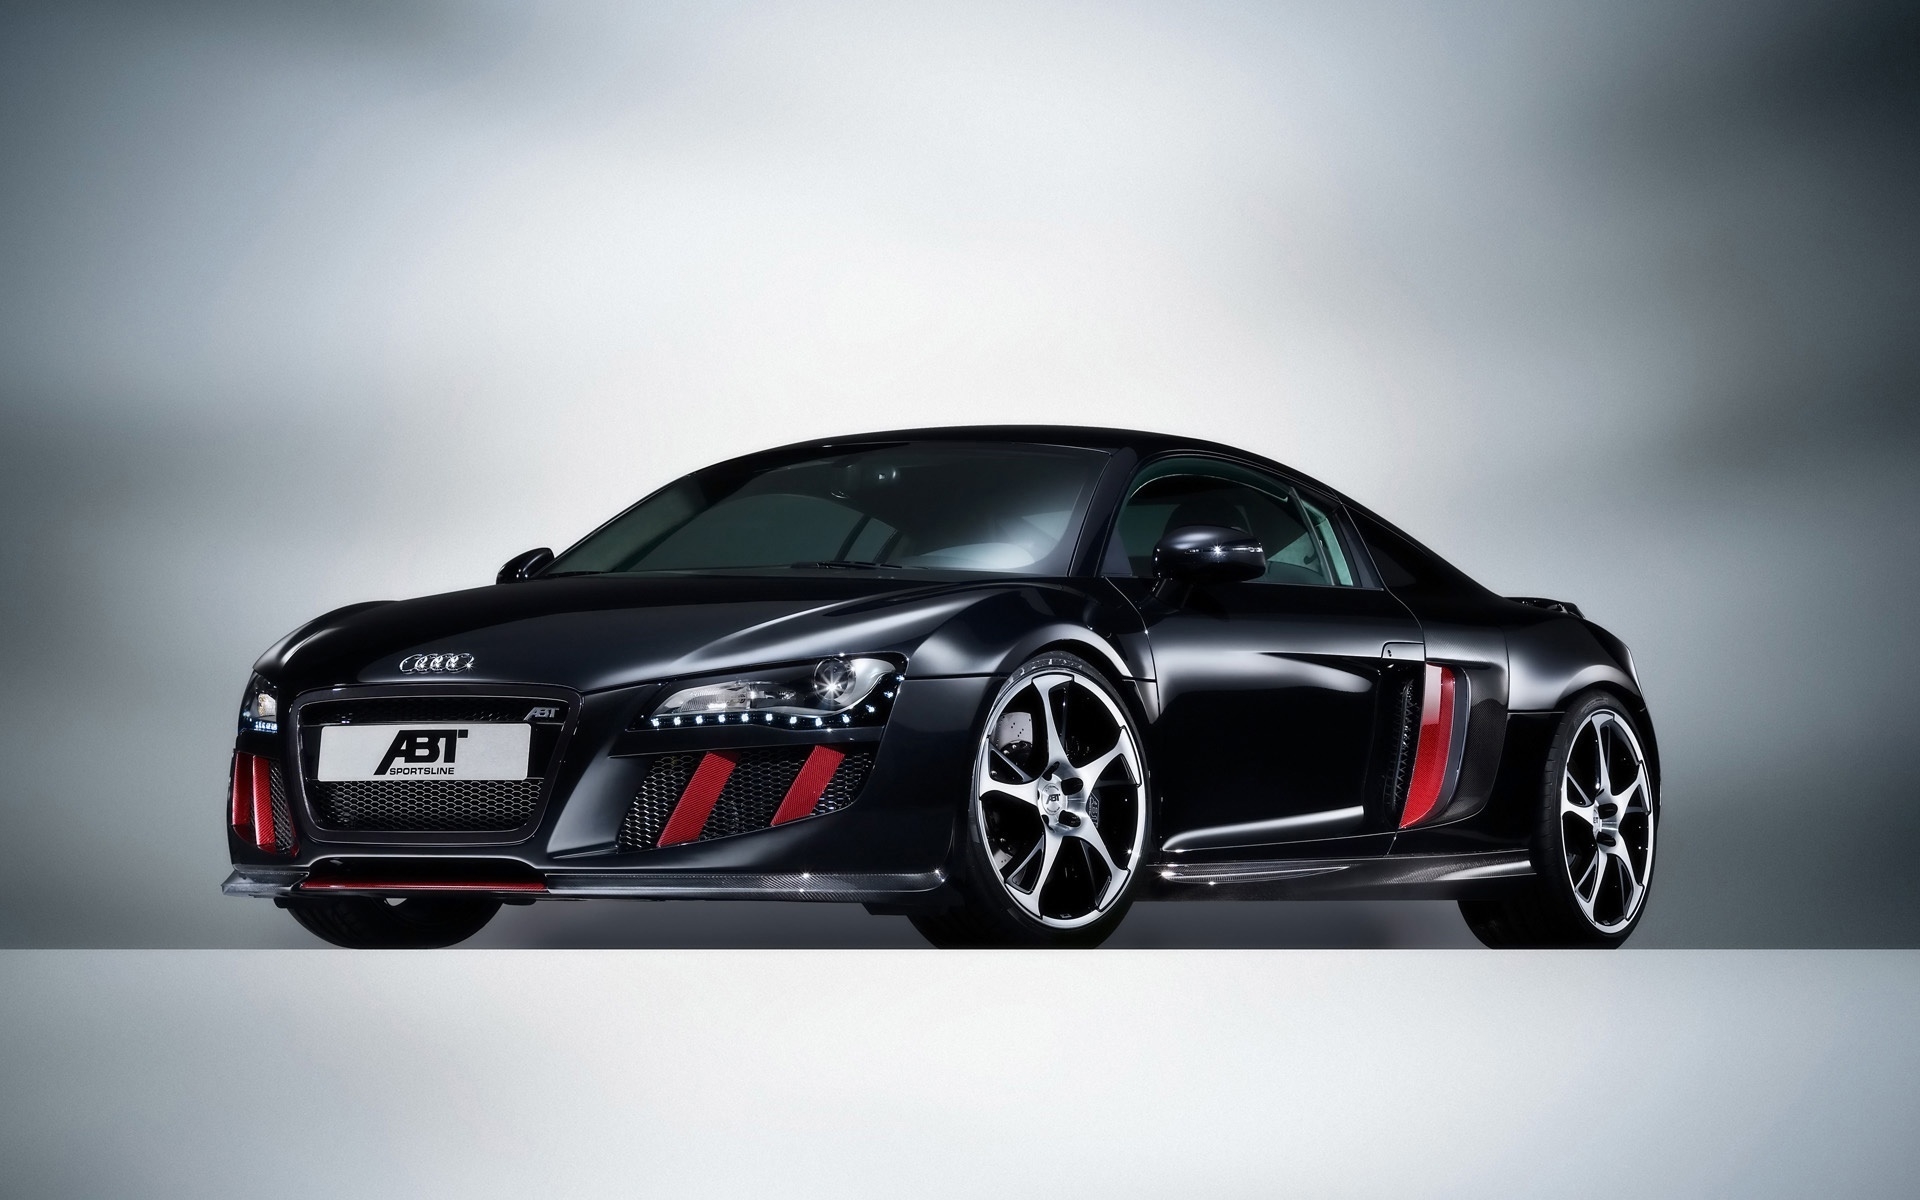 2008 Abt Audi R8 - Front Angle Lights for 1920 x 1200 widescreen resolution